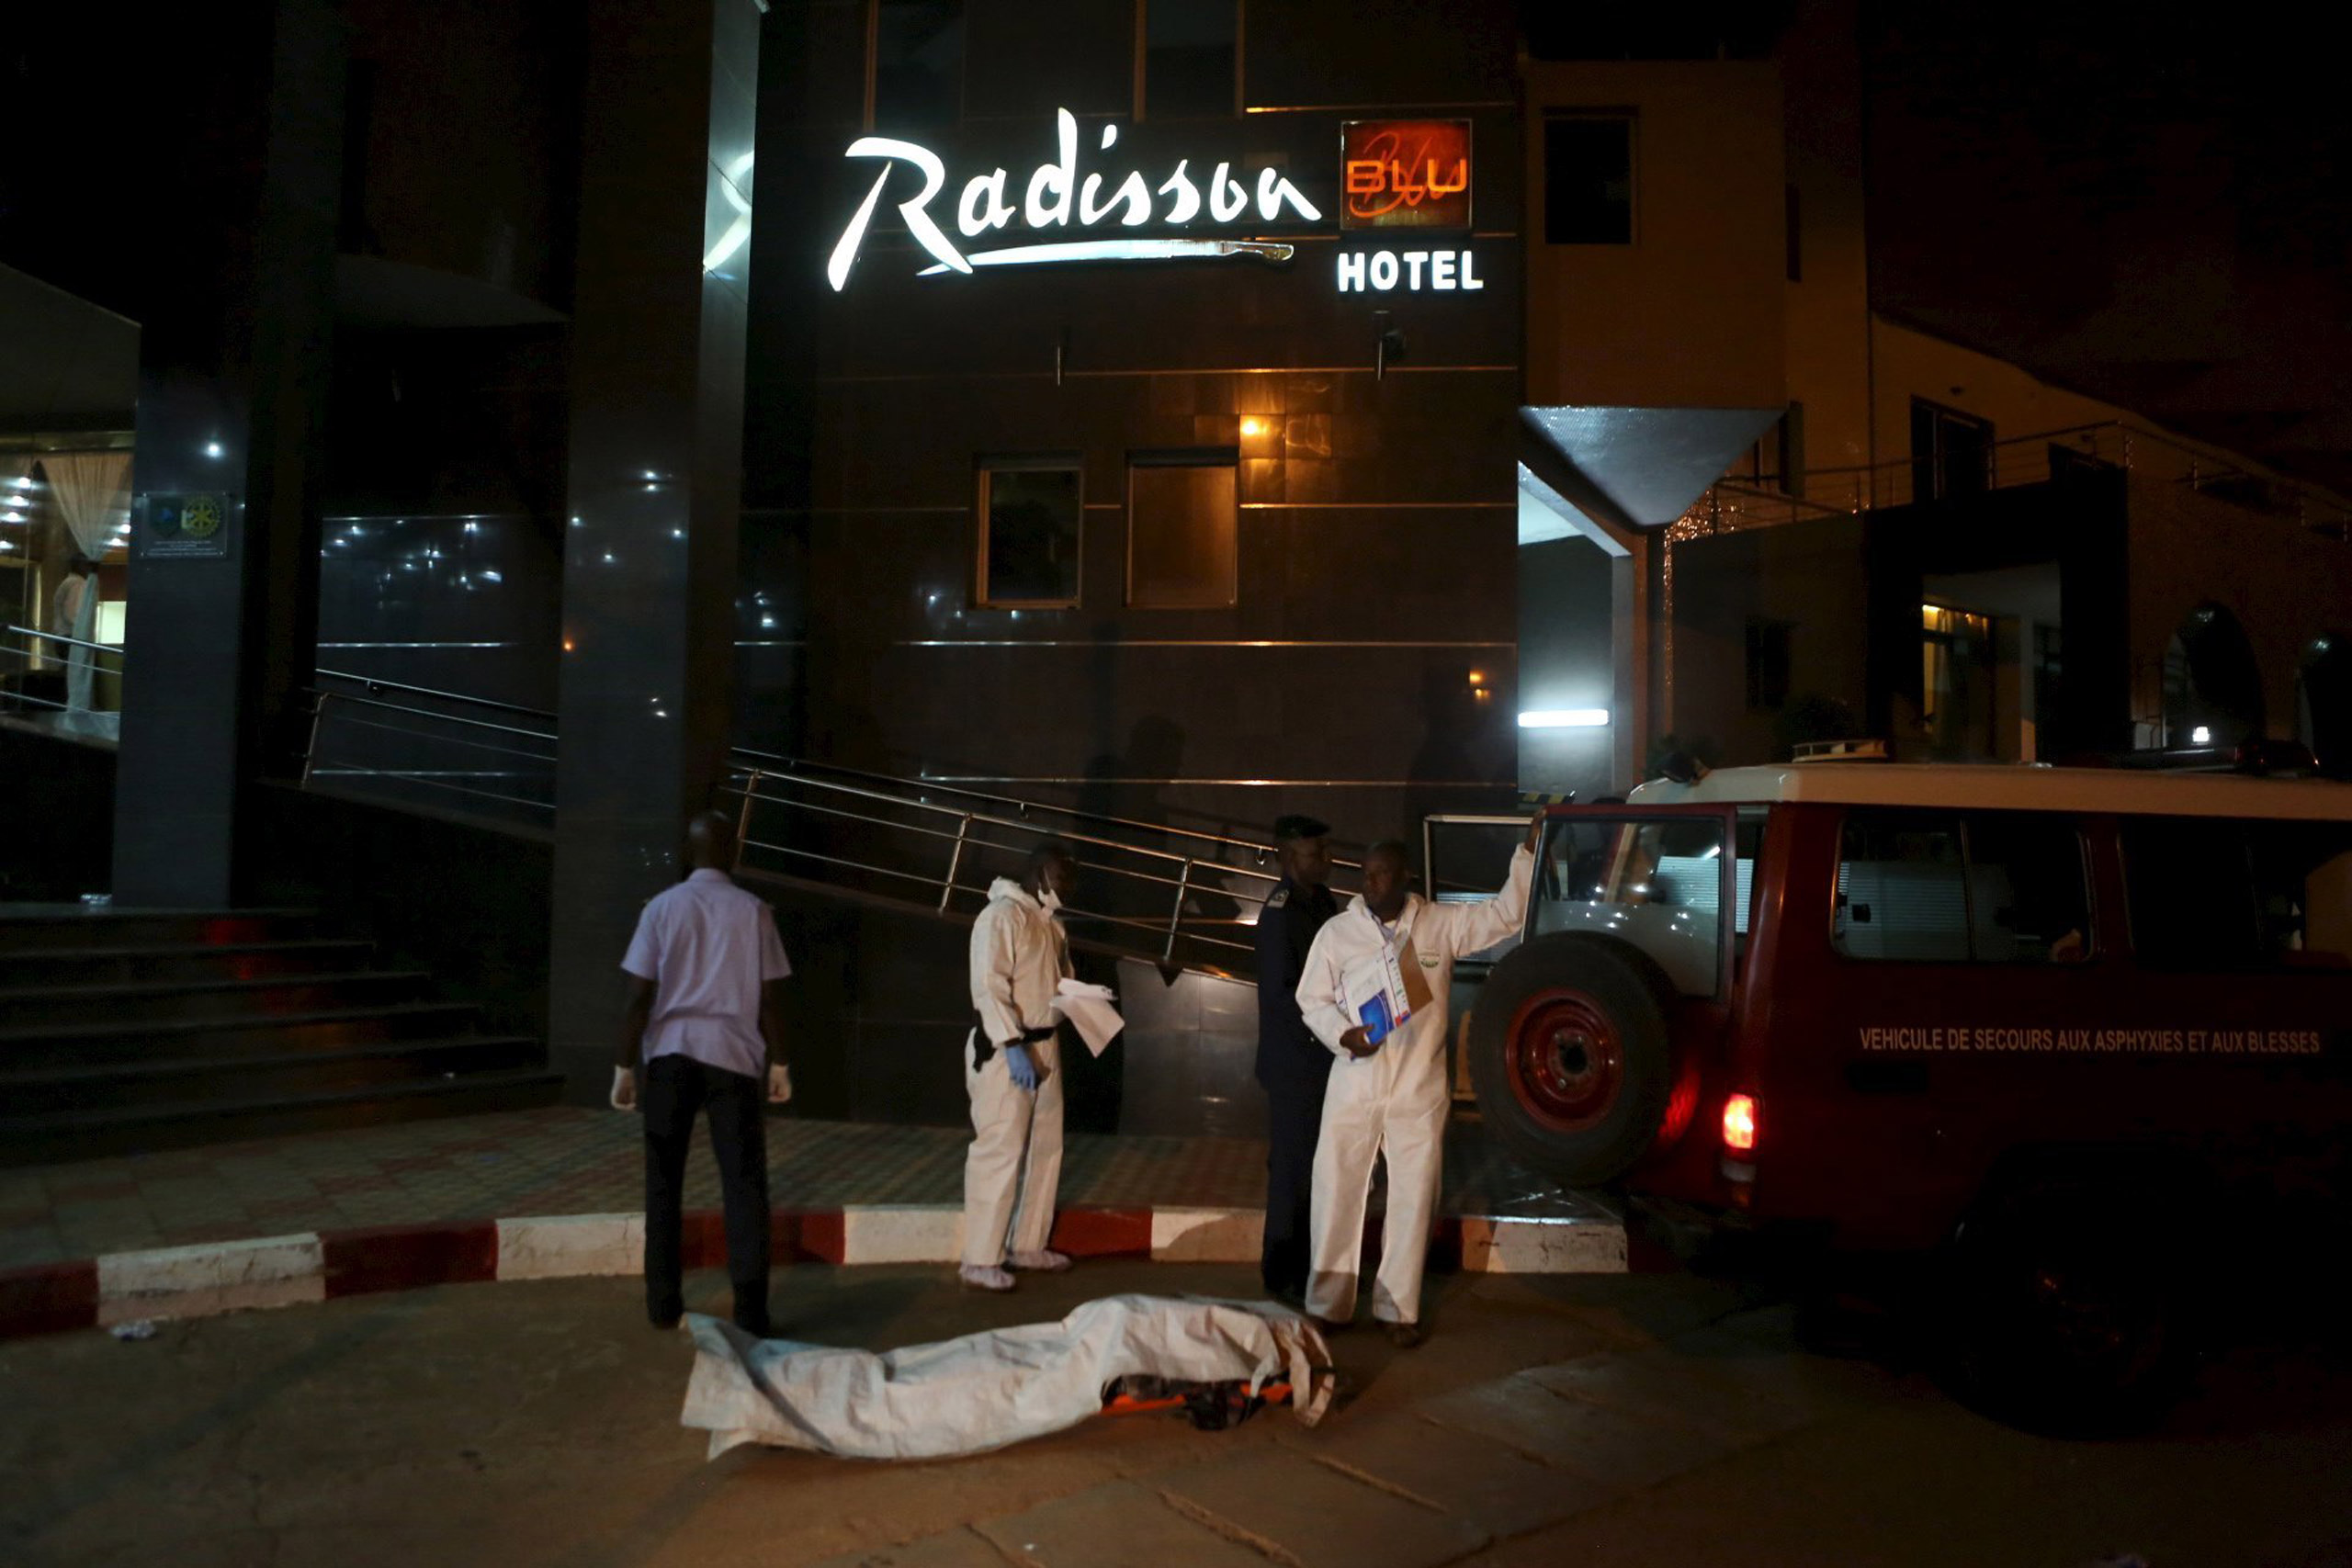 Malian officials prepare to lift a corpse into an emergency vehicle outside the Radisson hotel in Bamako, Mali, on Nov. 20, 2015.